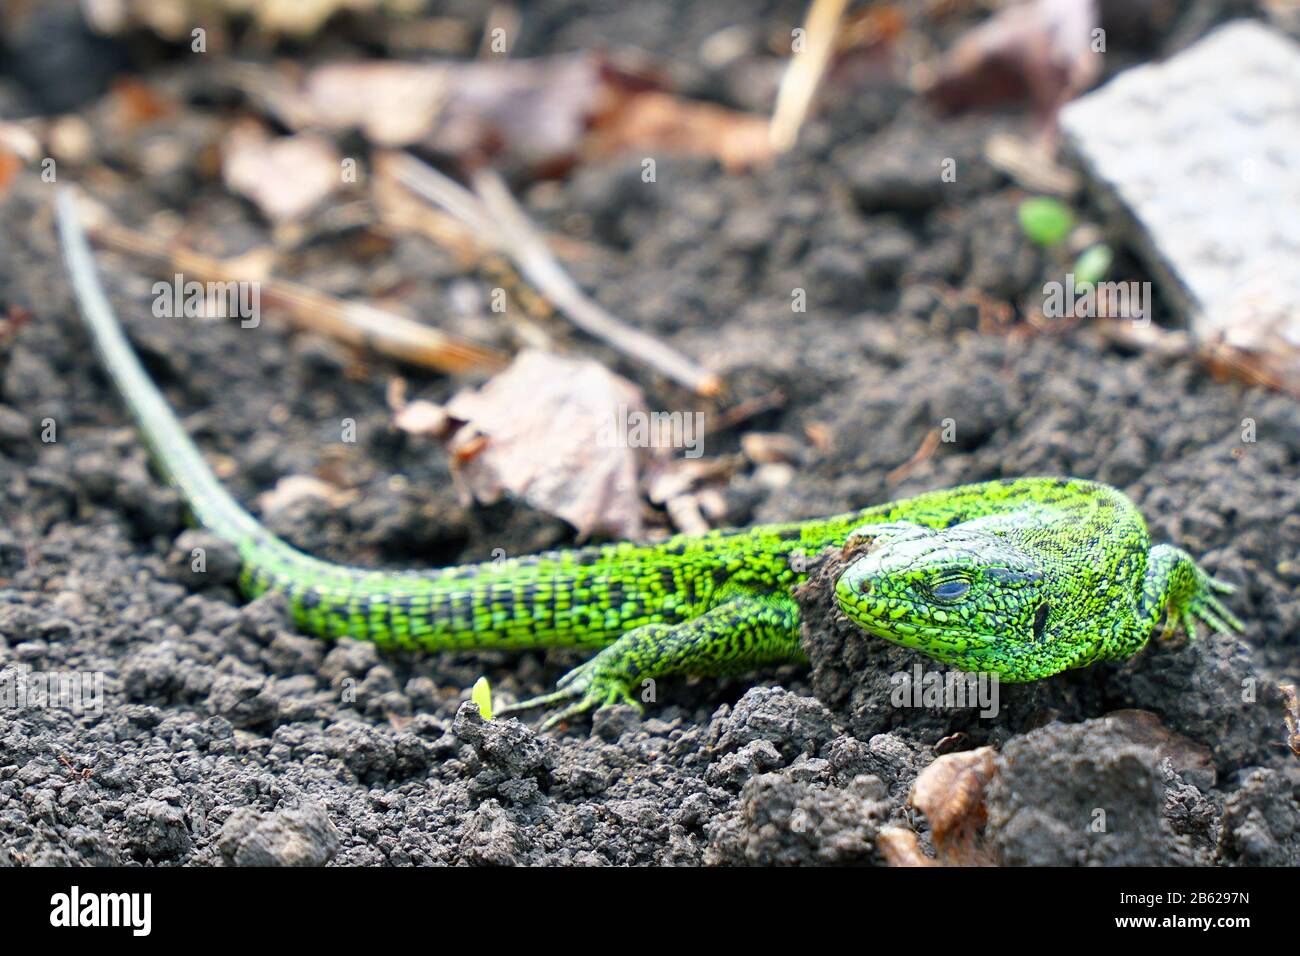 Portrait of a Small green lizard on the ground. Selective focus Stock Photo